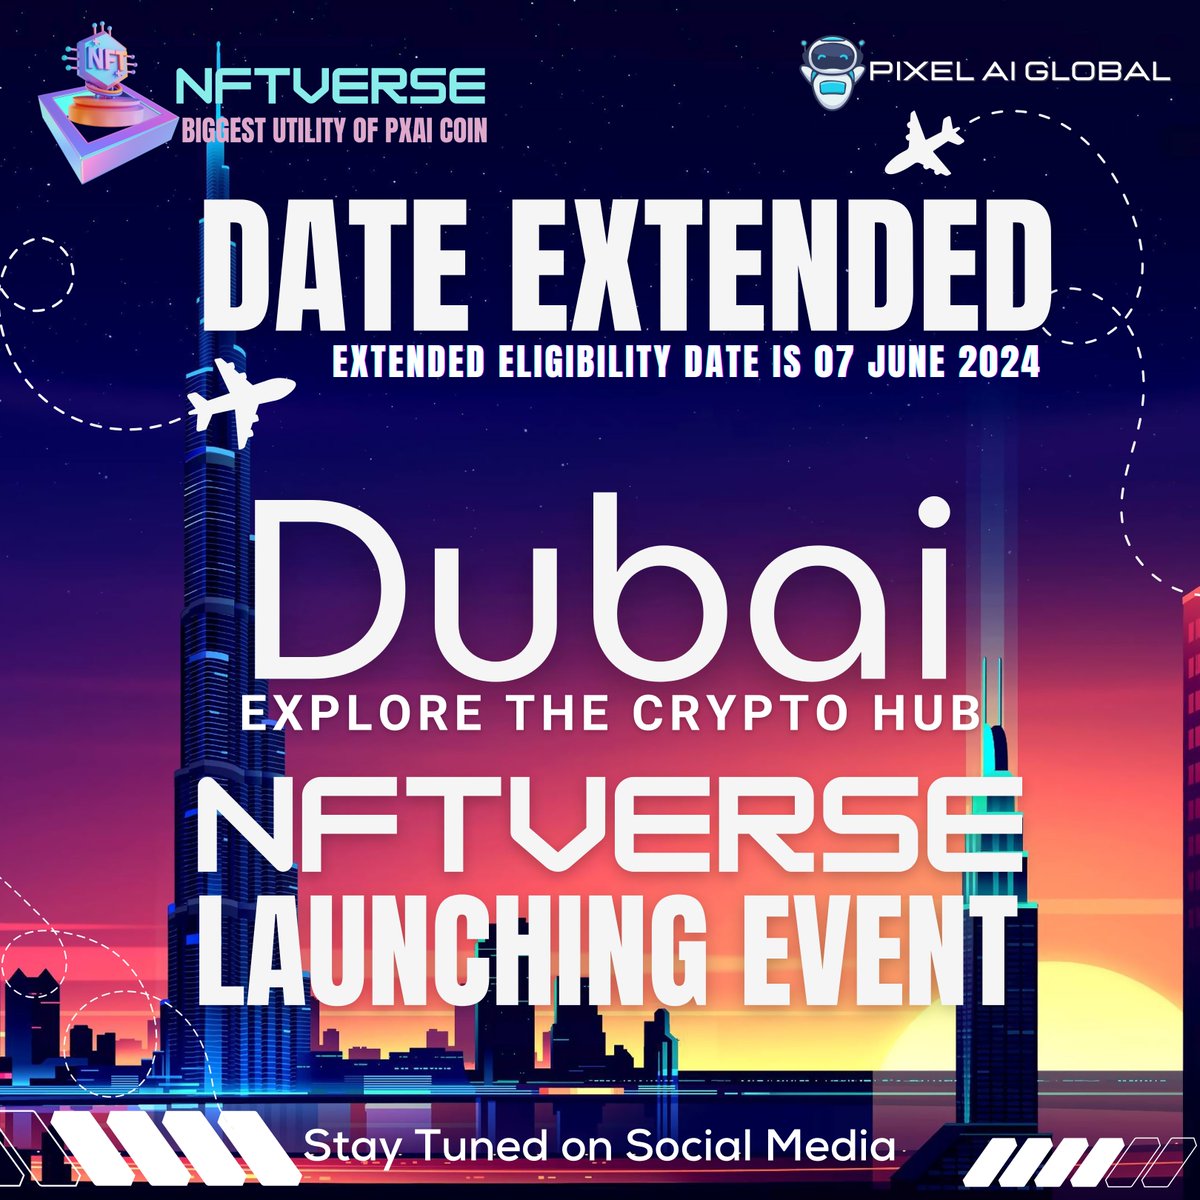 🌟 Great news !🌟
The deadline for qualifying for the Dubai tour has been extended to June 7, 2024.
You now have more time to prepare and secure your spot.
Don't miss out on this amazing opportunity with PixelAi Global! 🌍🤩
#Travel #DubaiTour #PixelAiGlobal #ExtendedDeadline